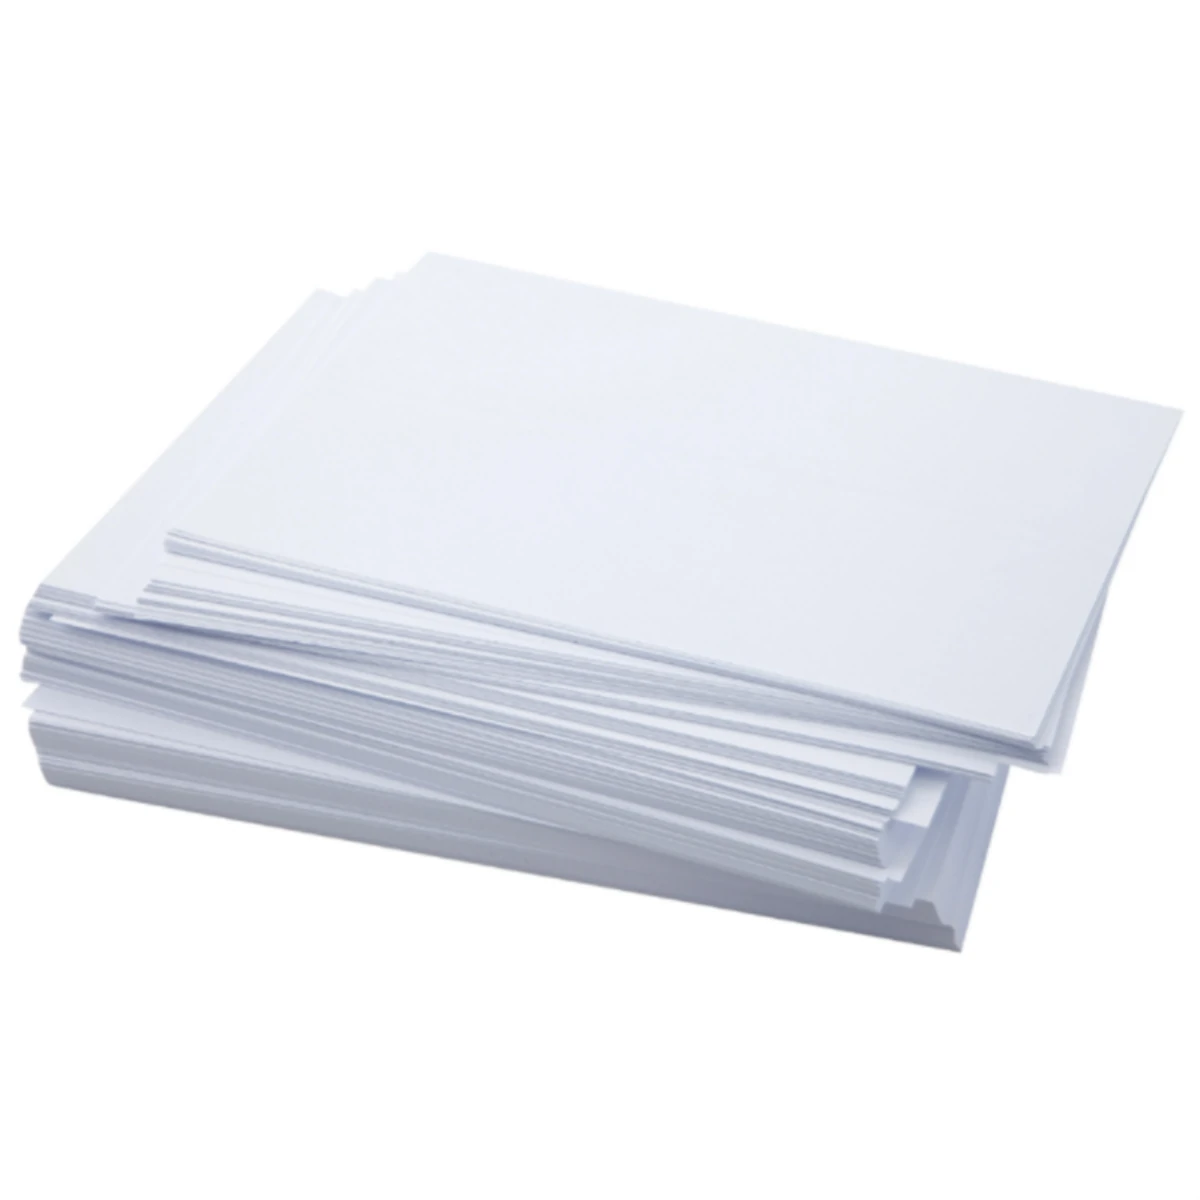 Find Comix C5674 2500 Sheets Multipurpose Copy Printer Paper 5 Ream Case Paper for Printer A4 297 210mm Draft Paper Office School Supplies for Sale on Gipsybee.com